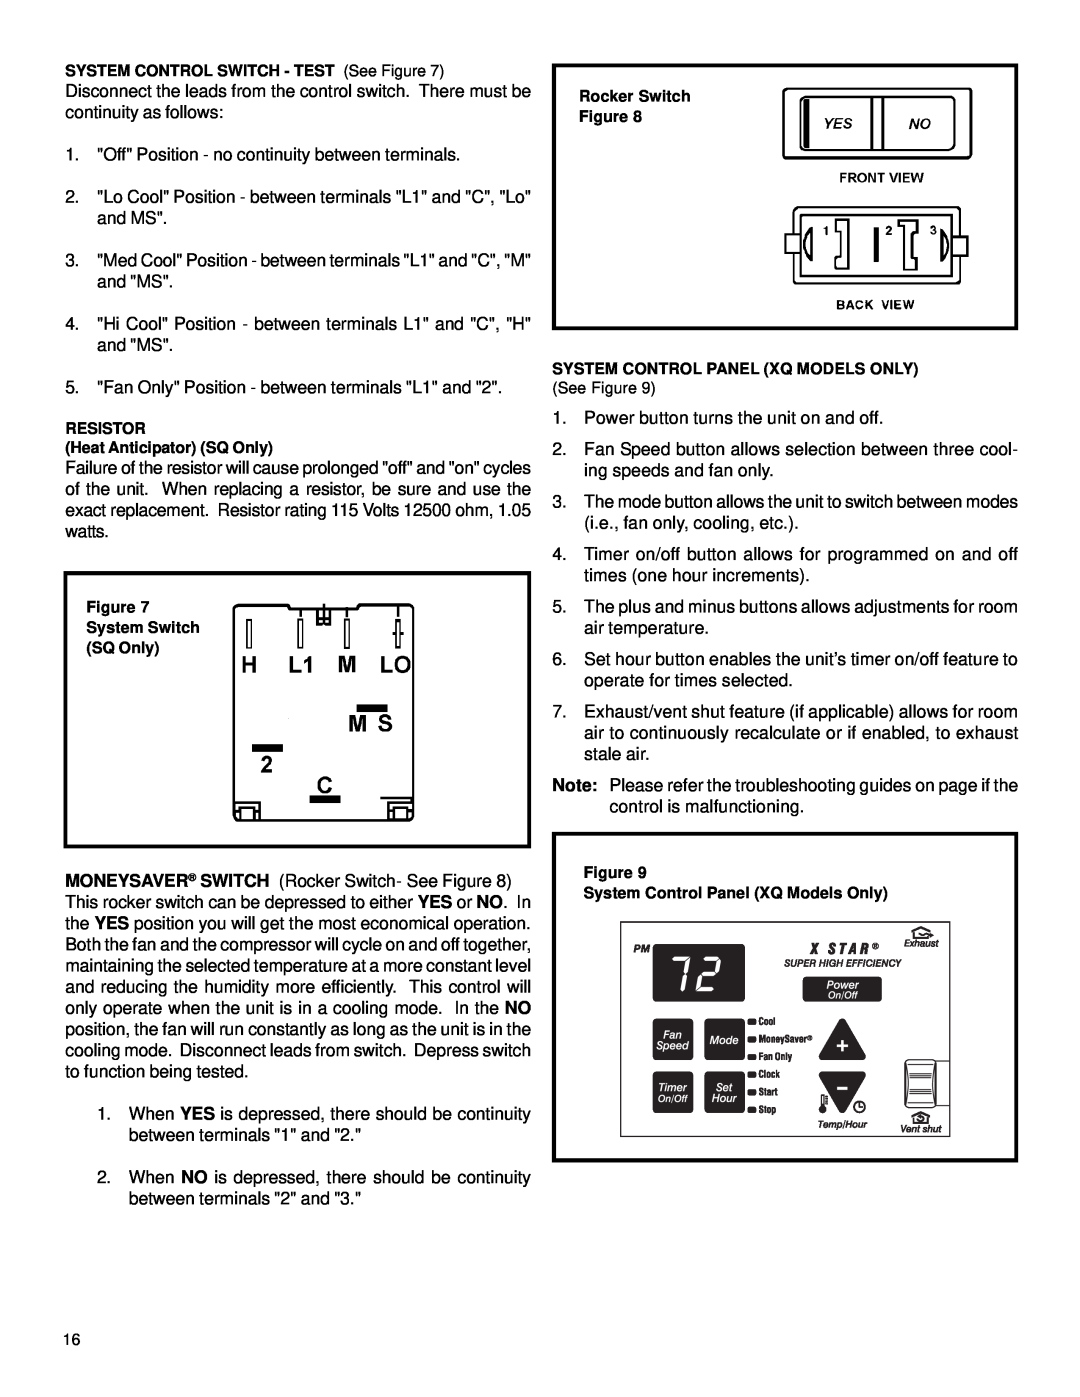 Friedrich racservmn service manual Off Position - no continuity between terminals 